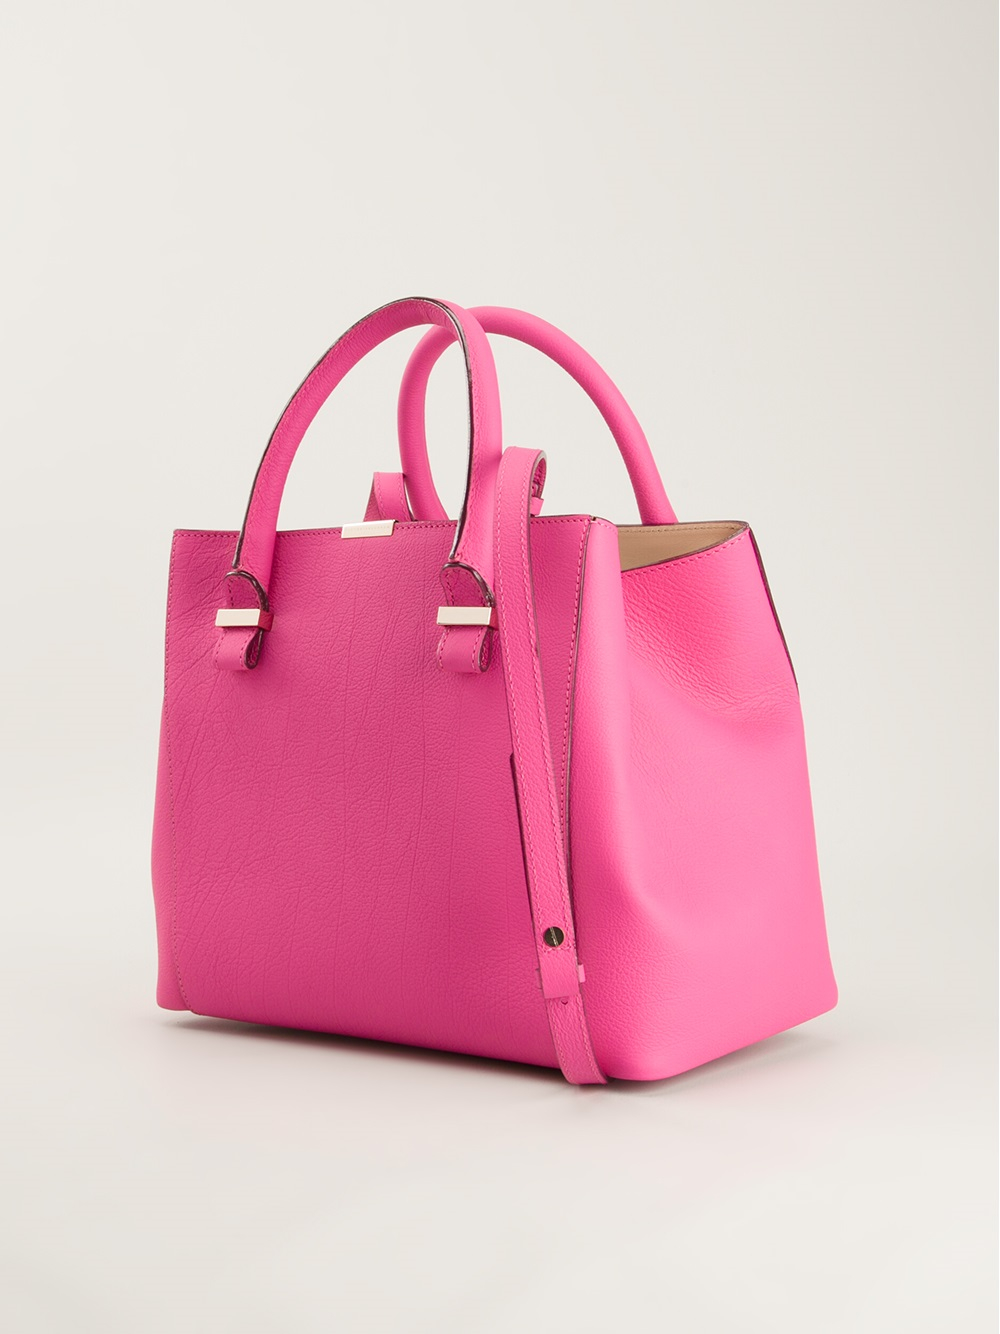 Victoria Beckham Quincy Tote Bag in Pink - Lyst